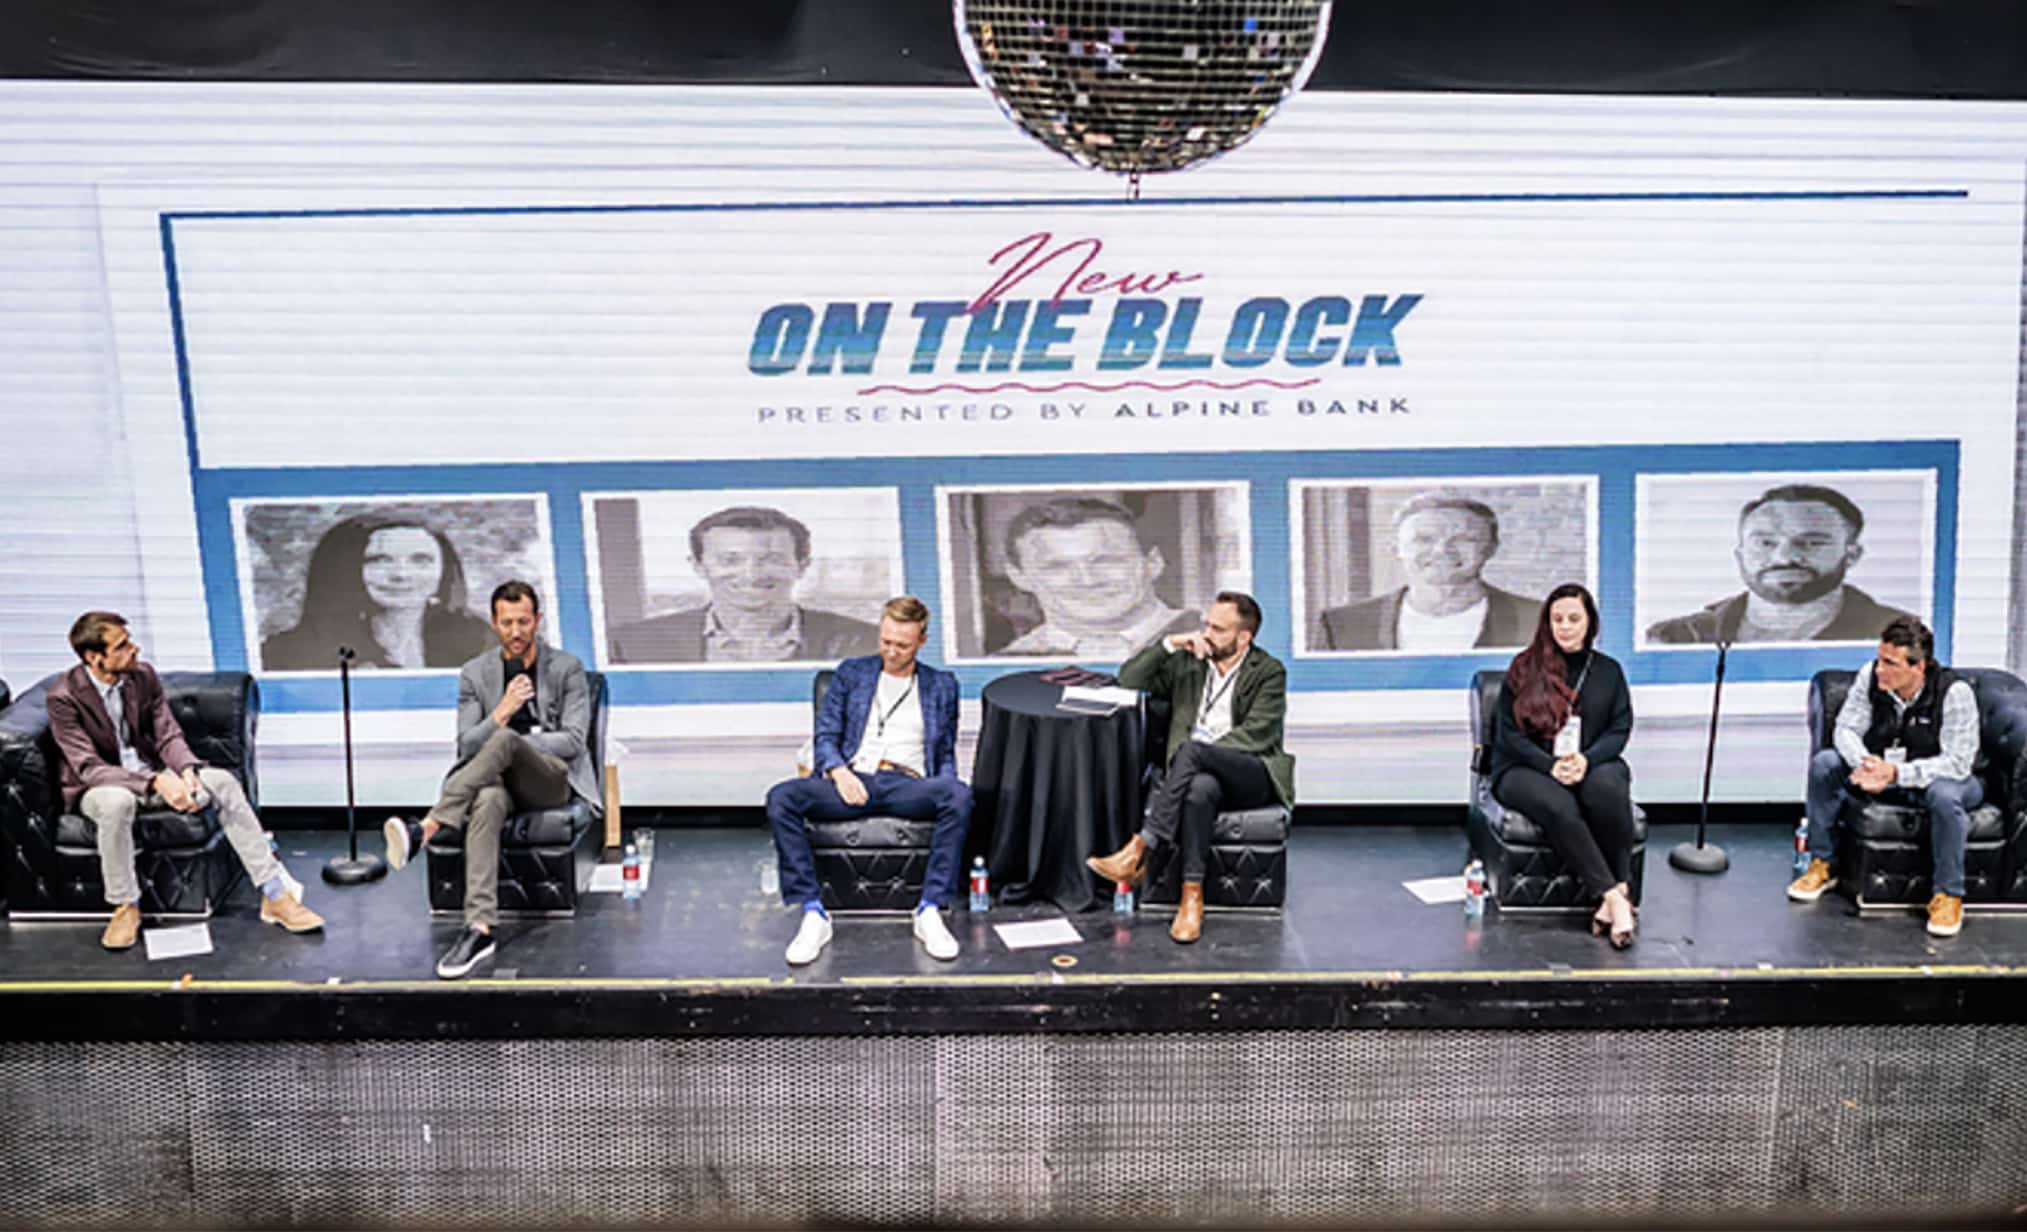 New on the Block event in Denver